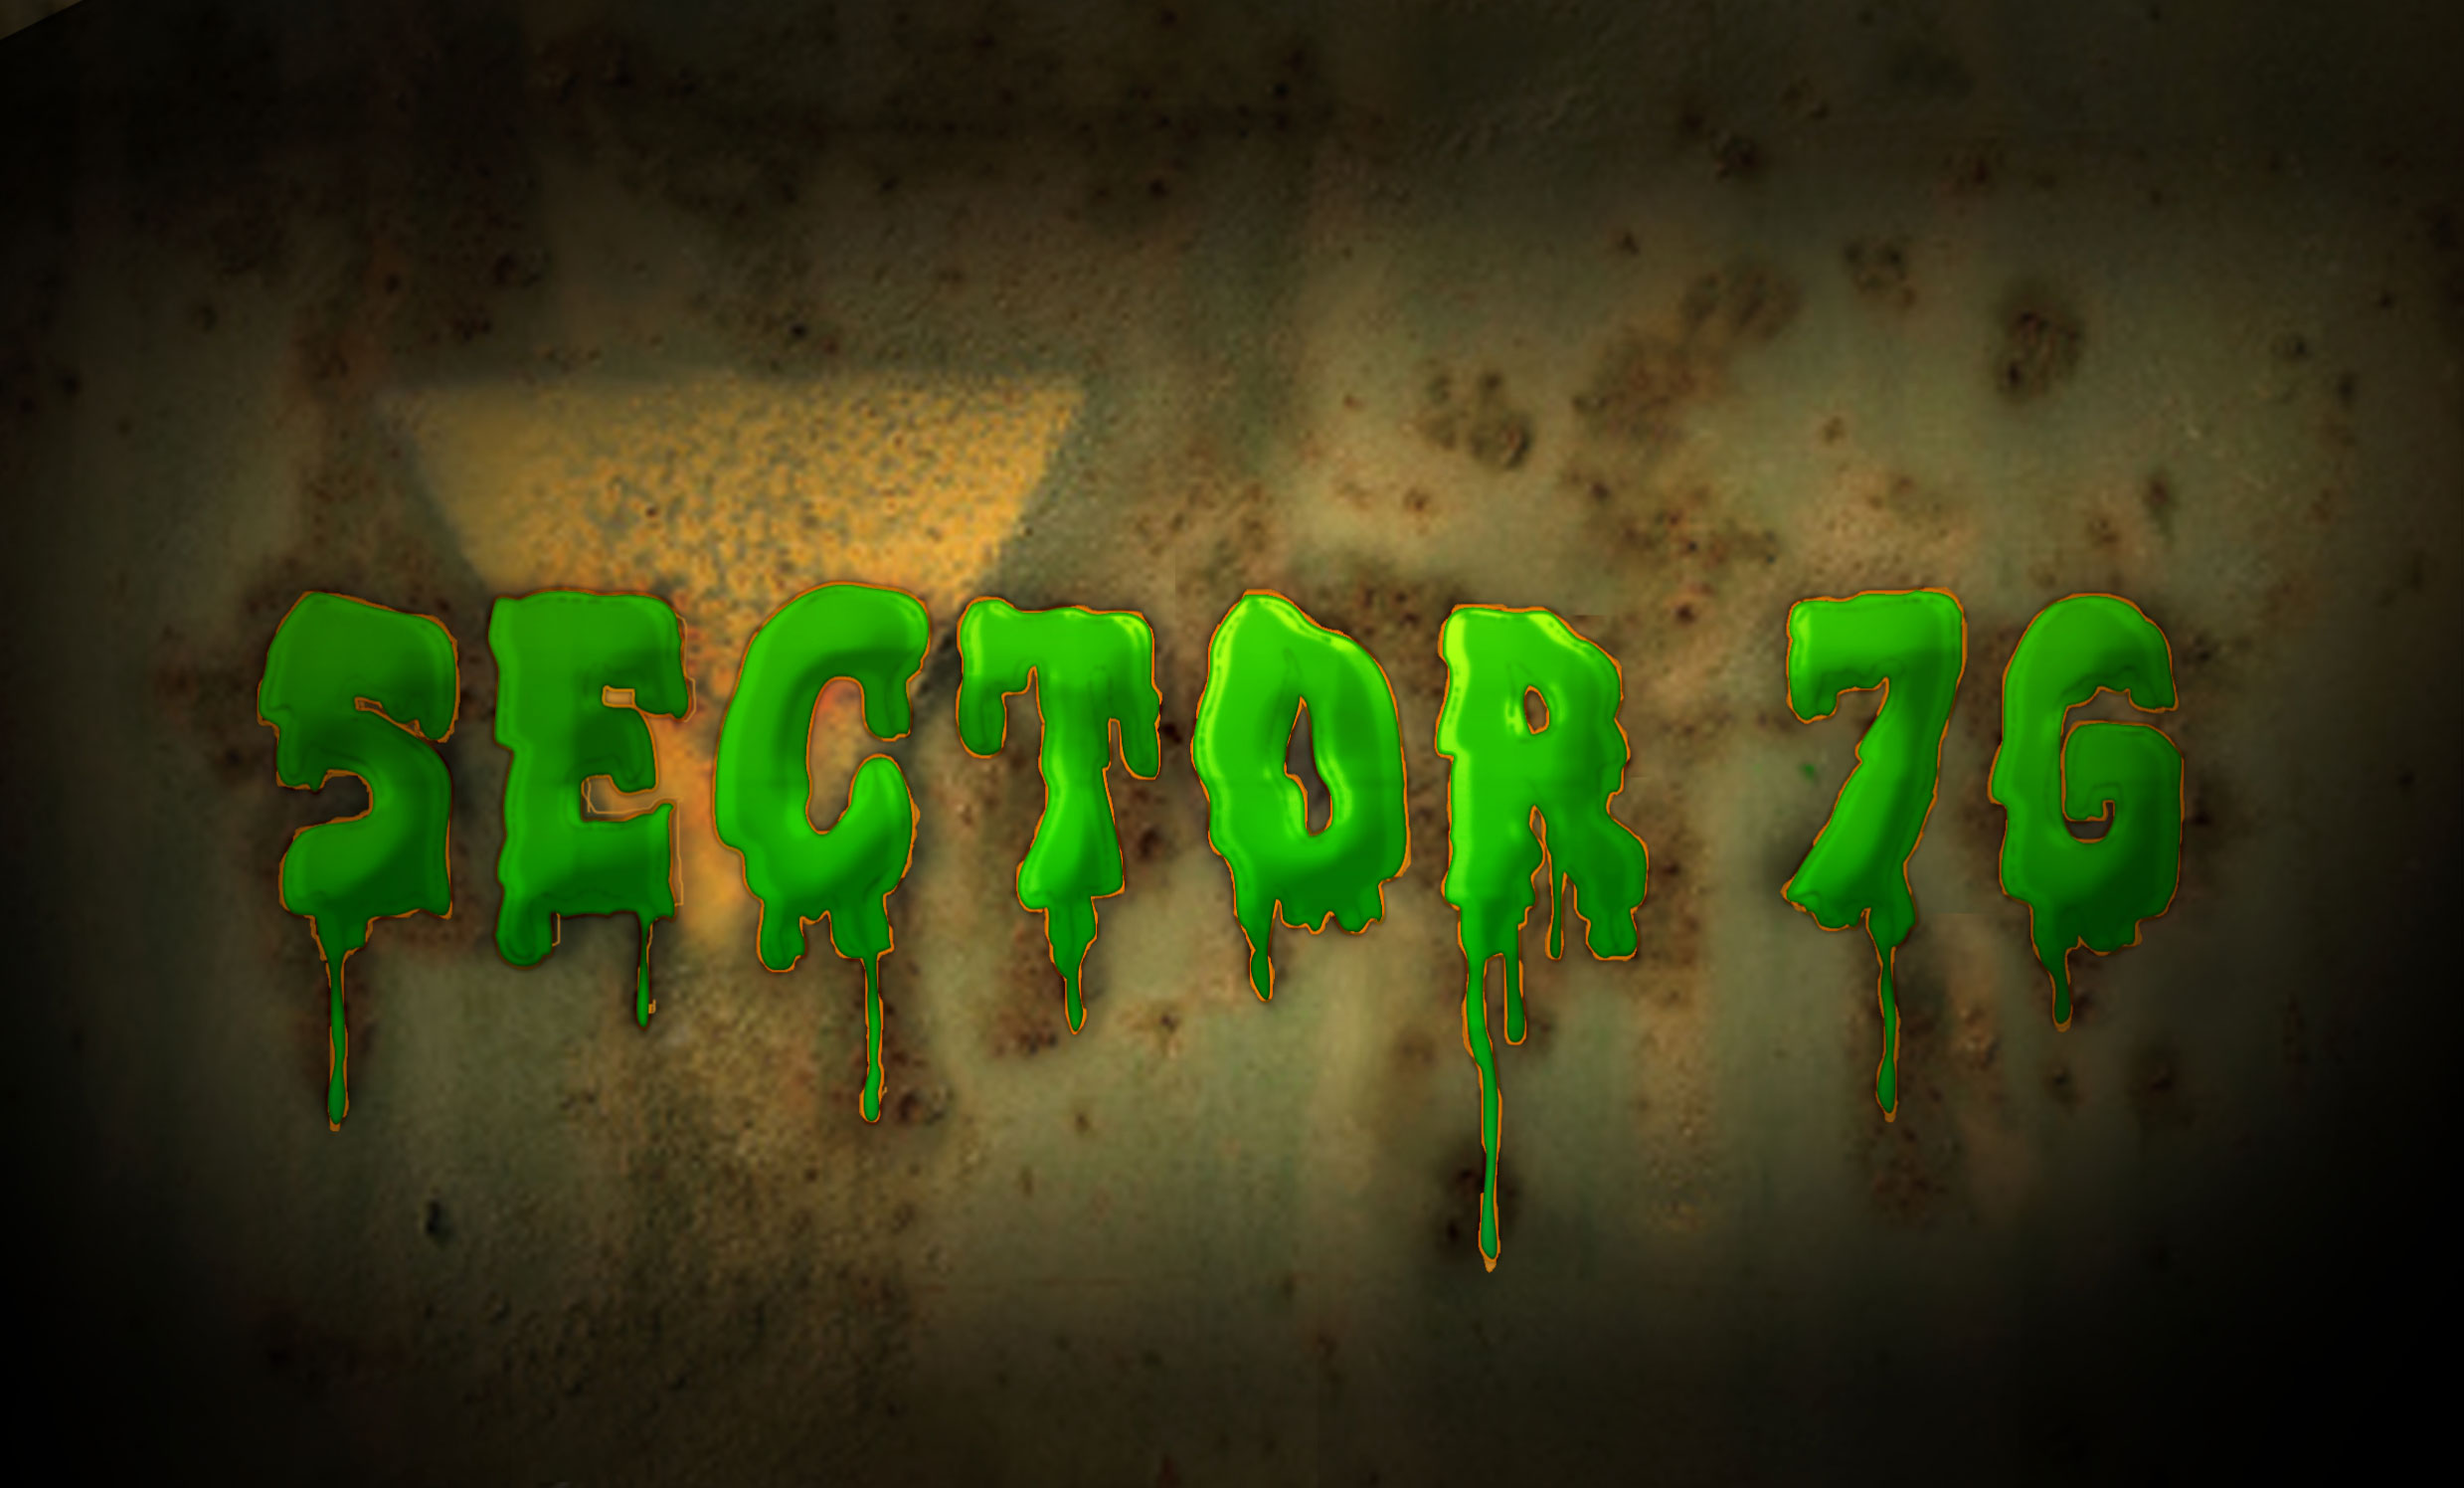 Official logo of Sector 7G